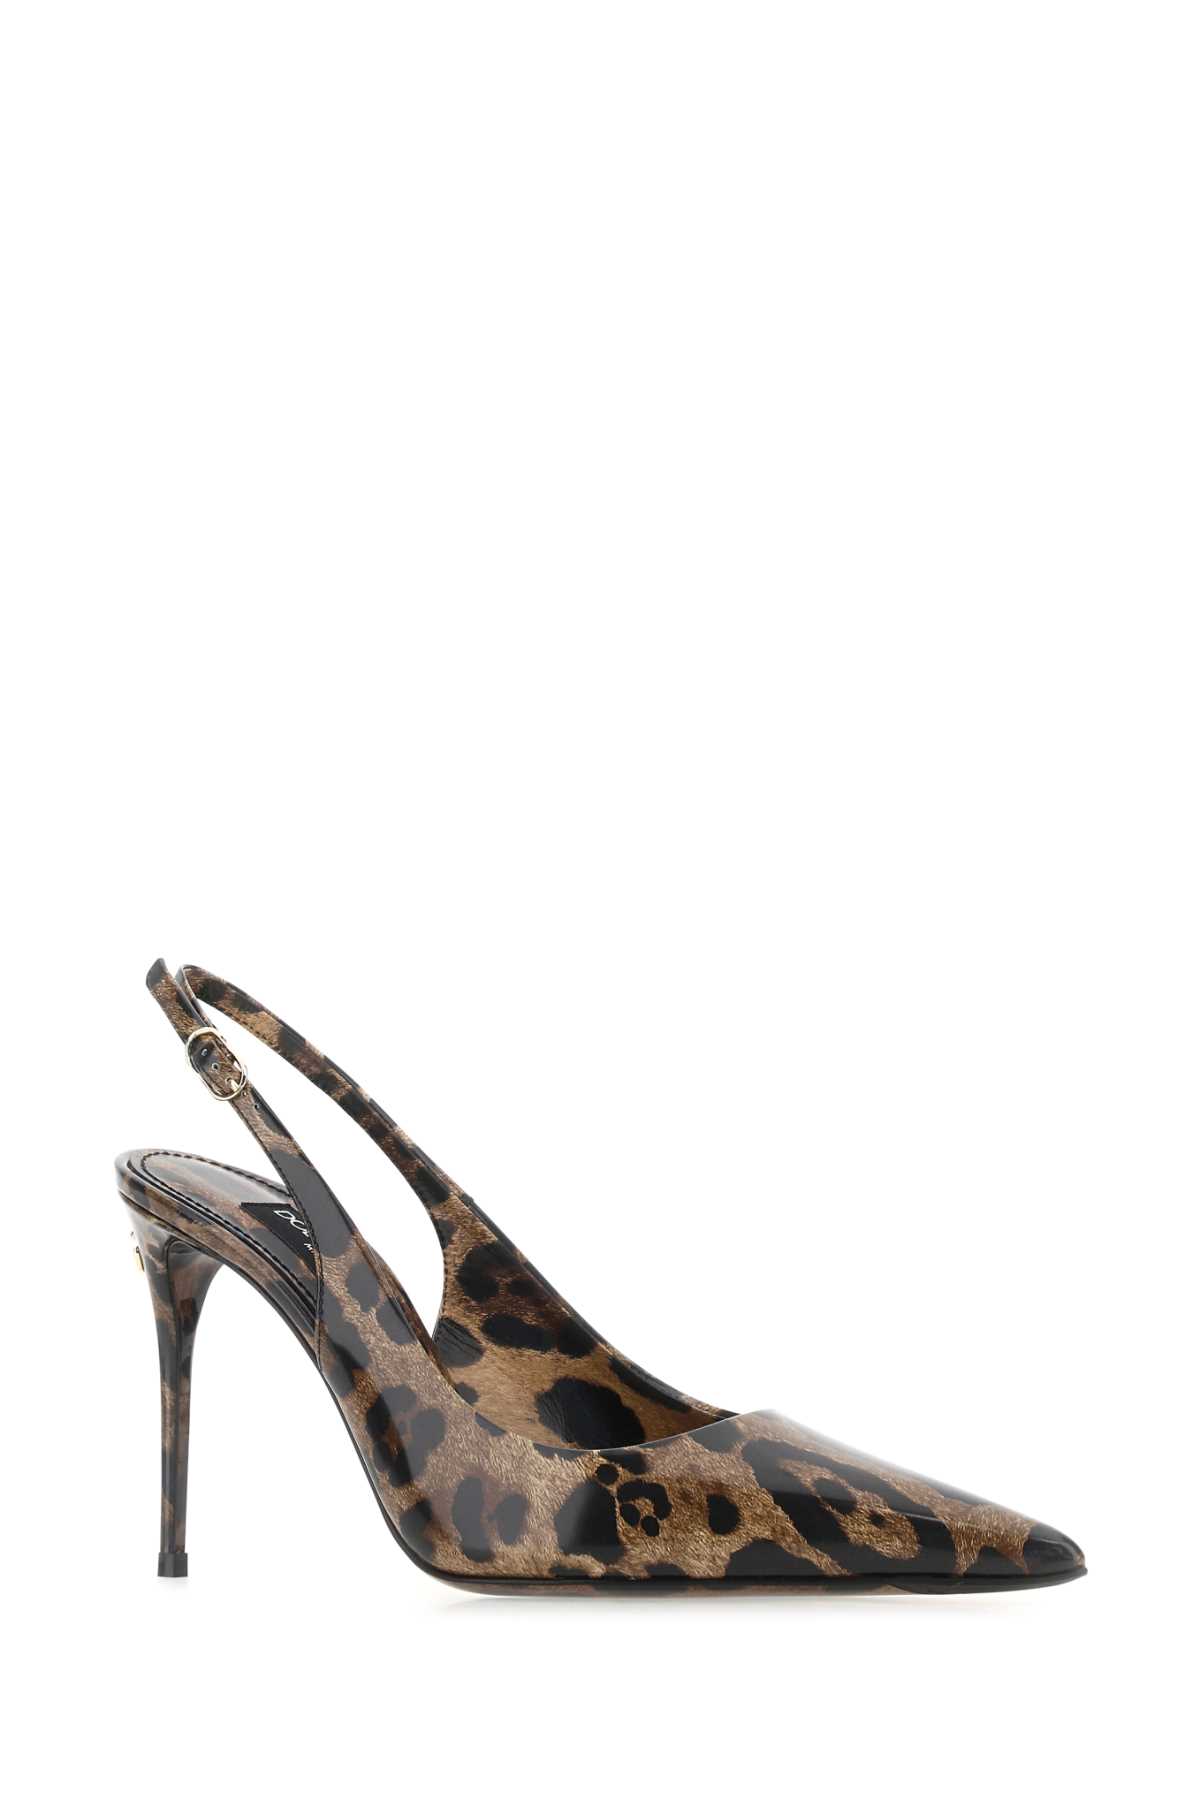 Shop Dolce & Gabbana Printed Leather Pumps In Leo